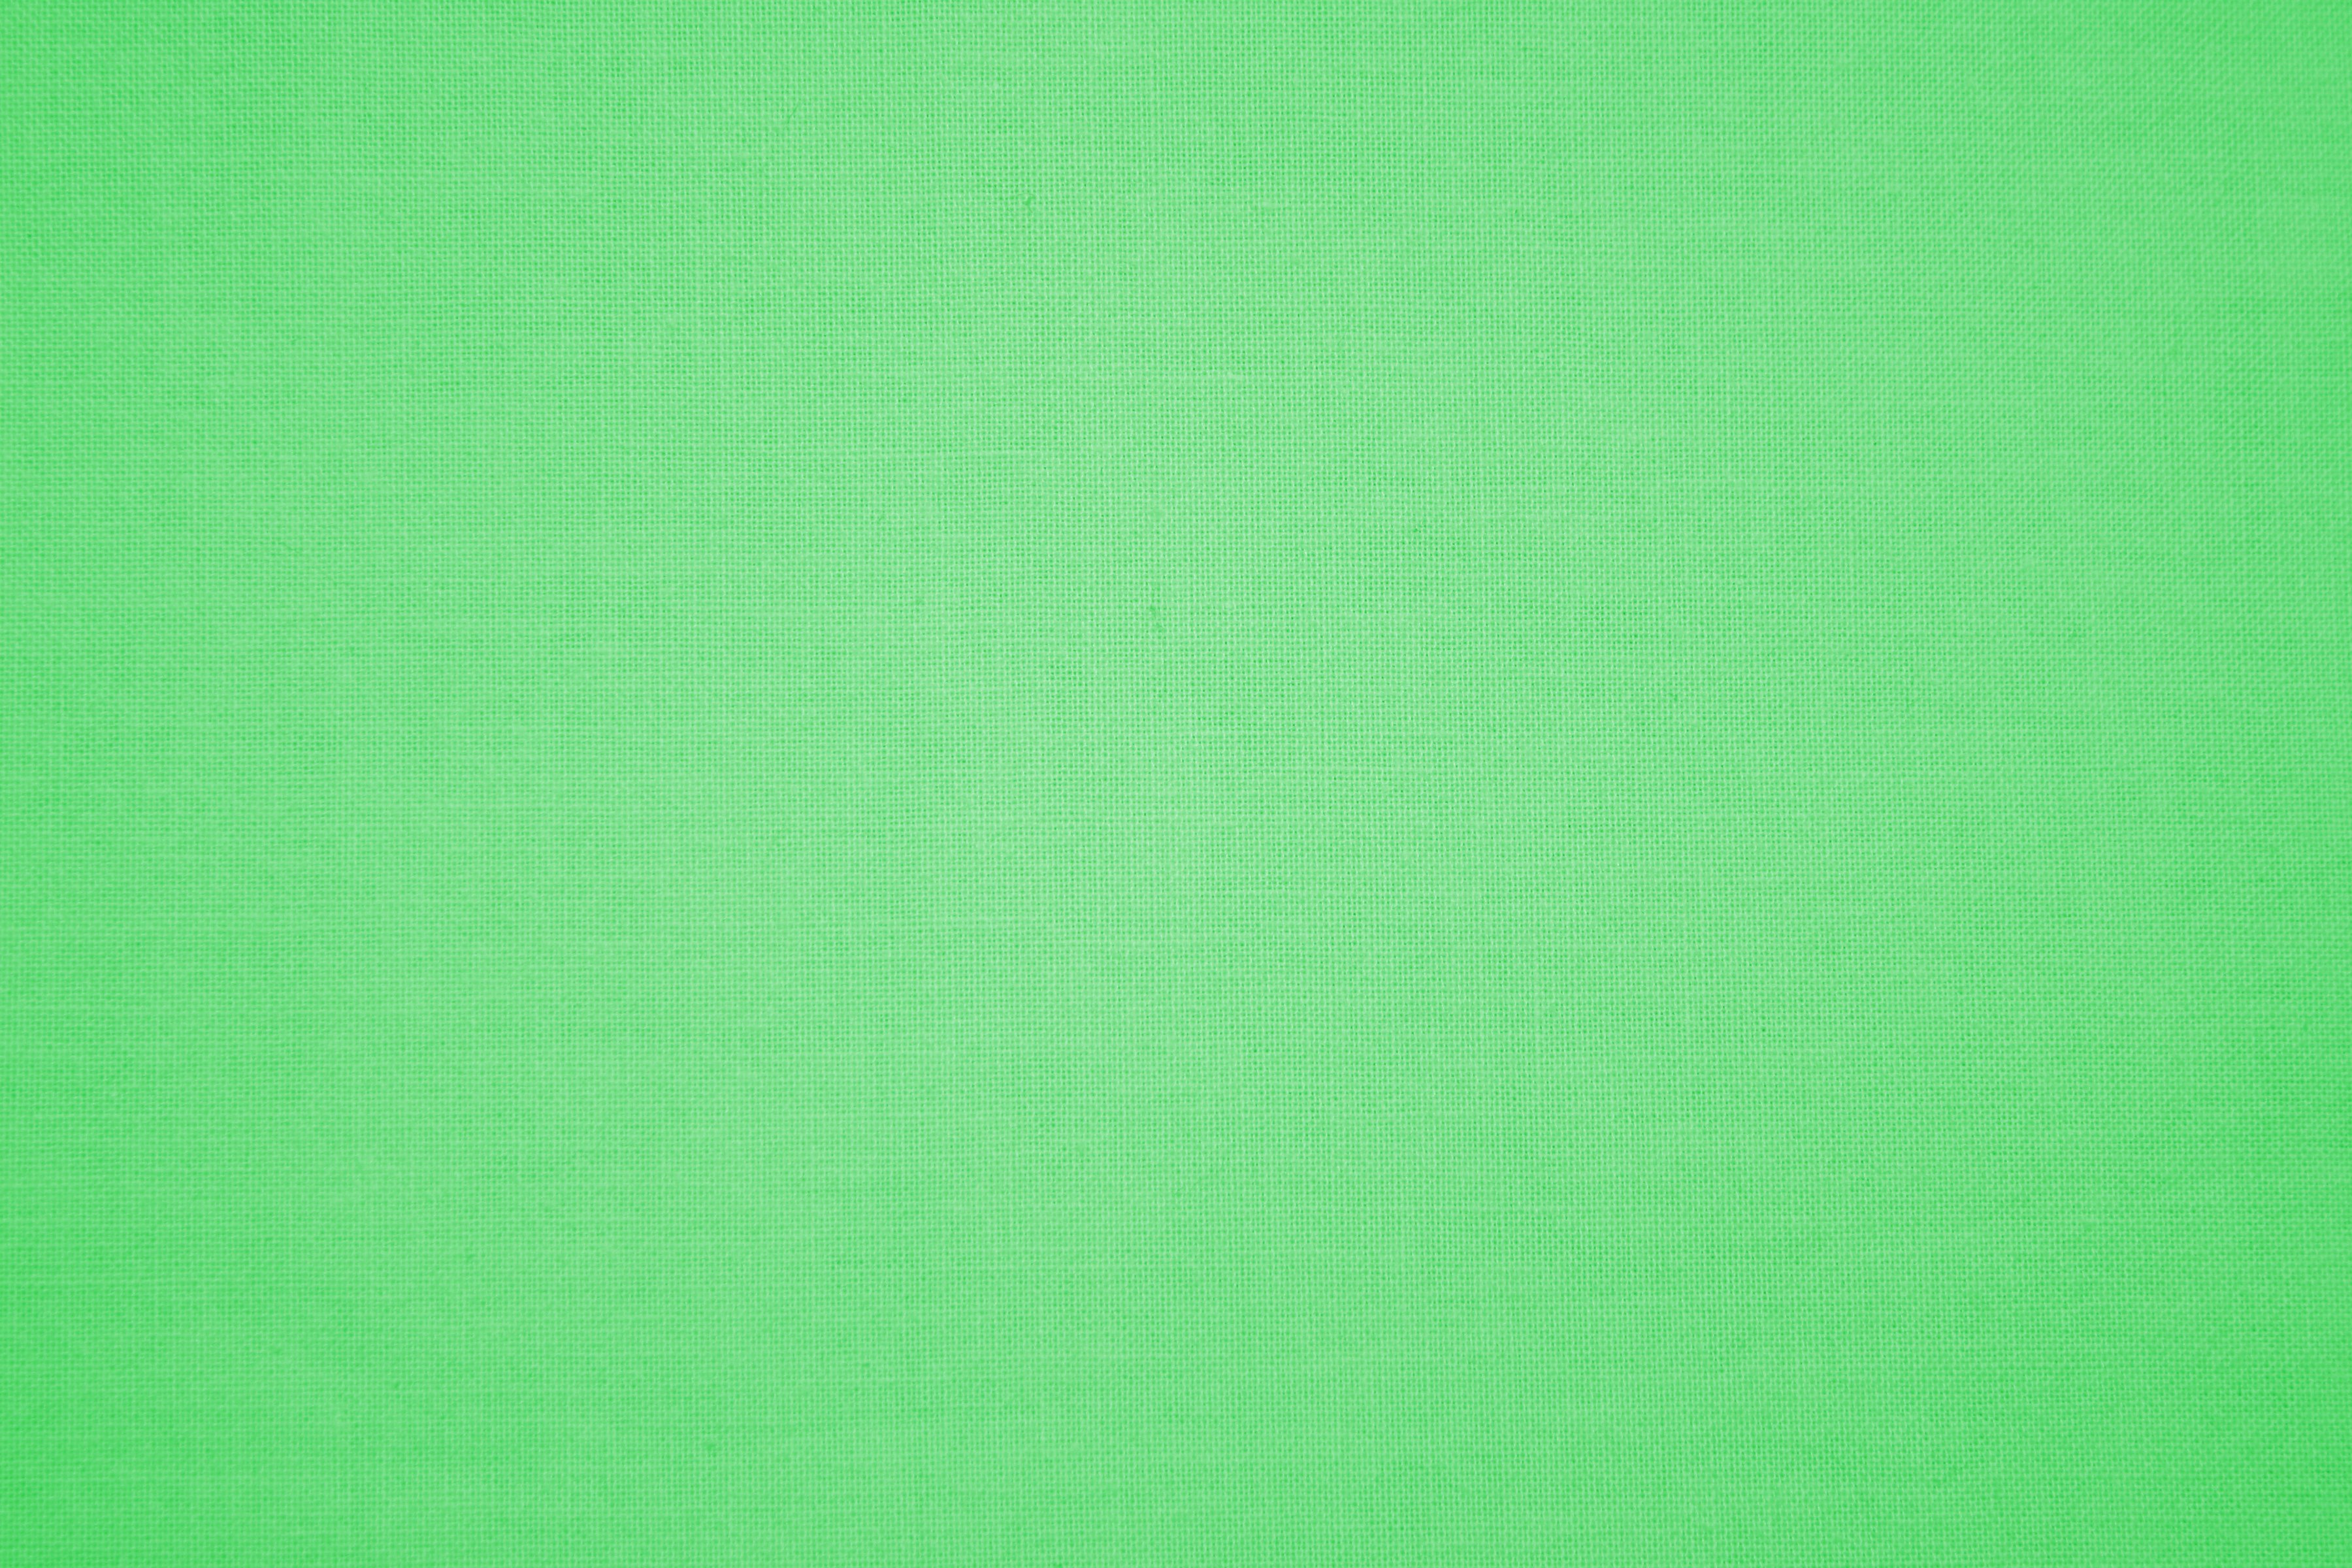 Light Green Canvas Fabric Texture Picture | Free Photograph ...